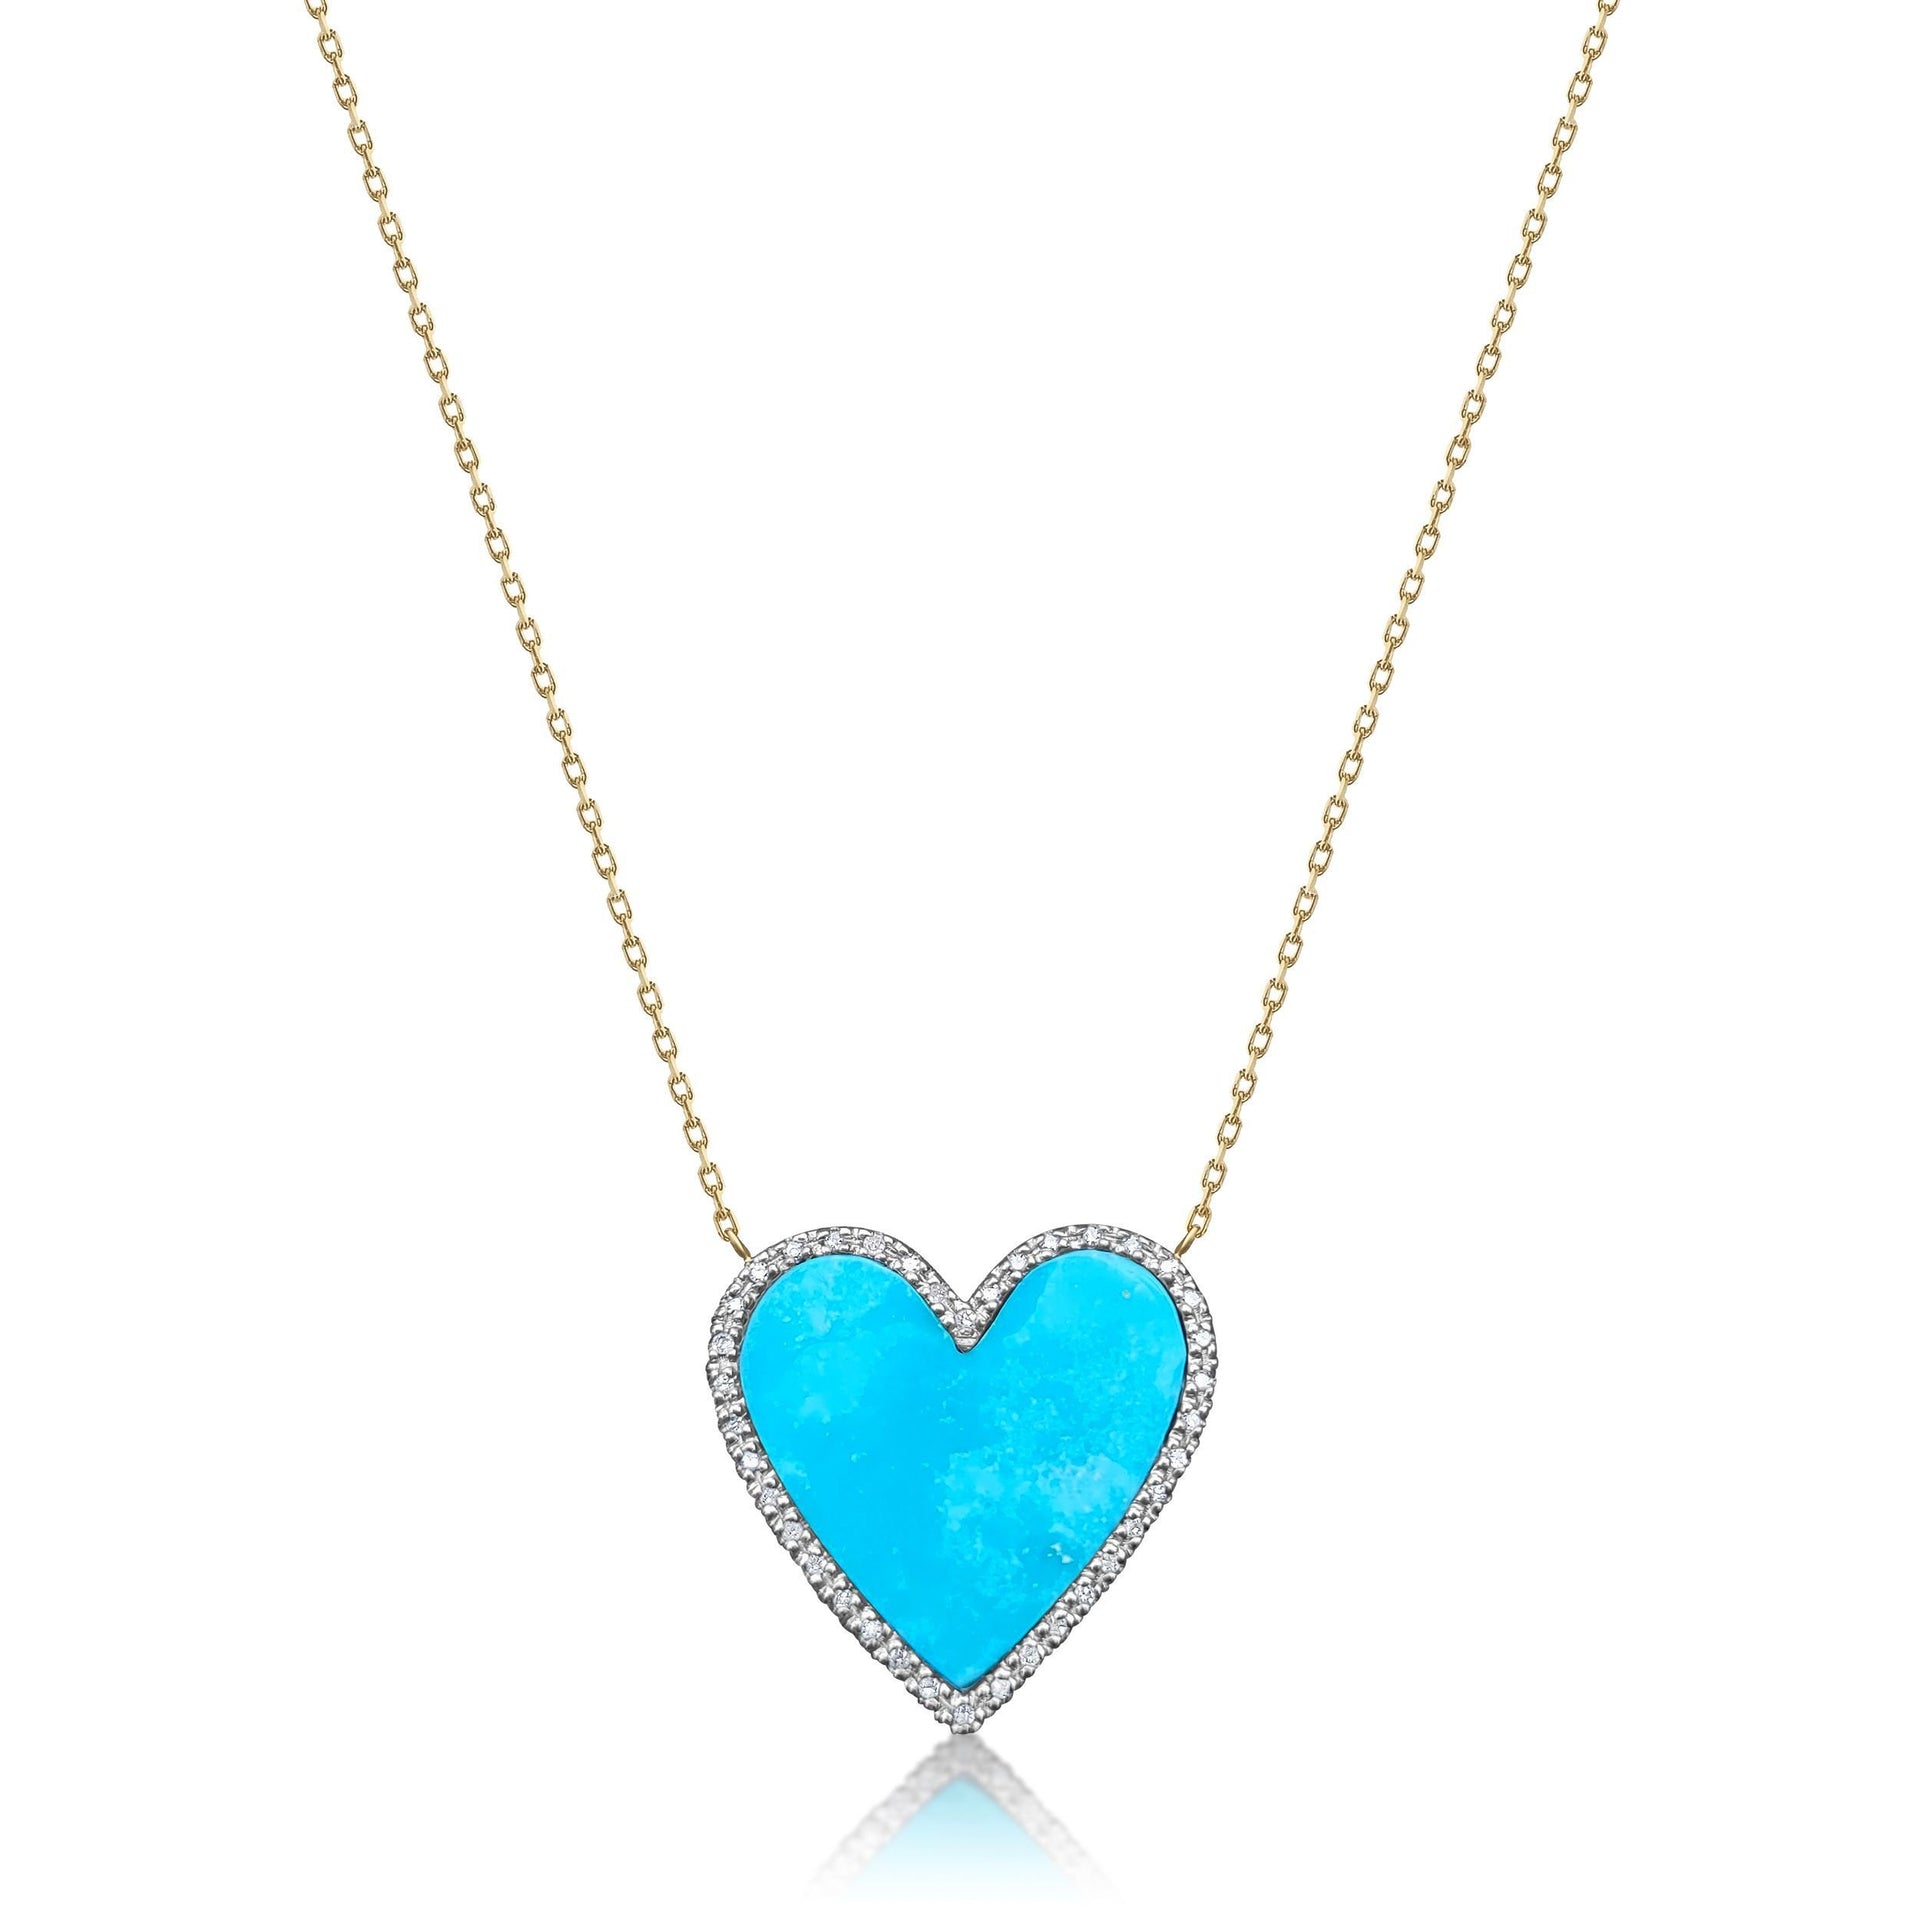 Diamond Heart Necklace in Colorful Gemstones